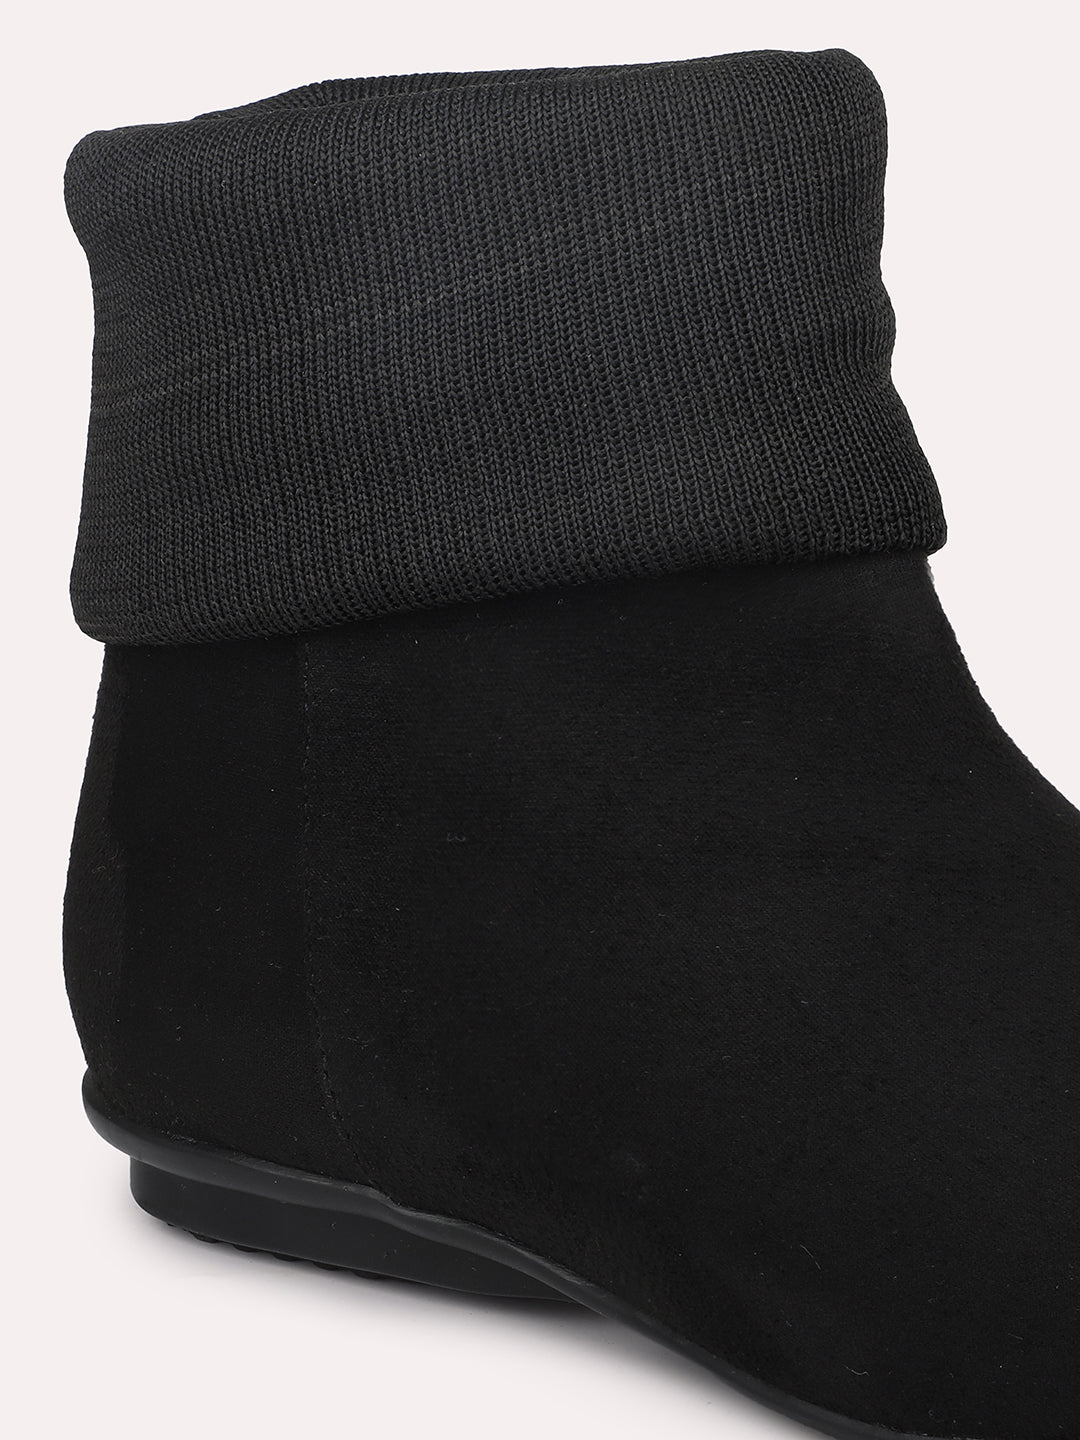 Women Black Solid Suede Flat Boots